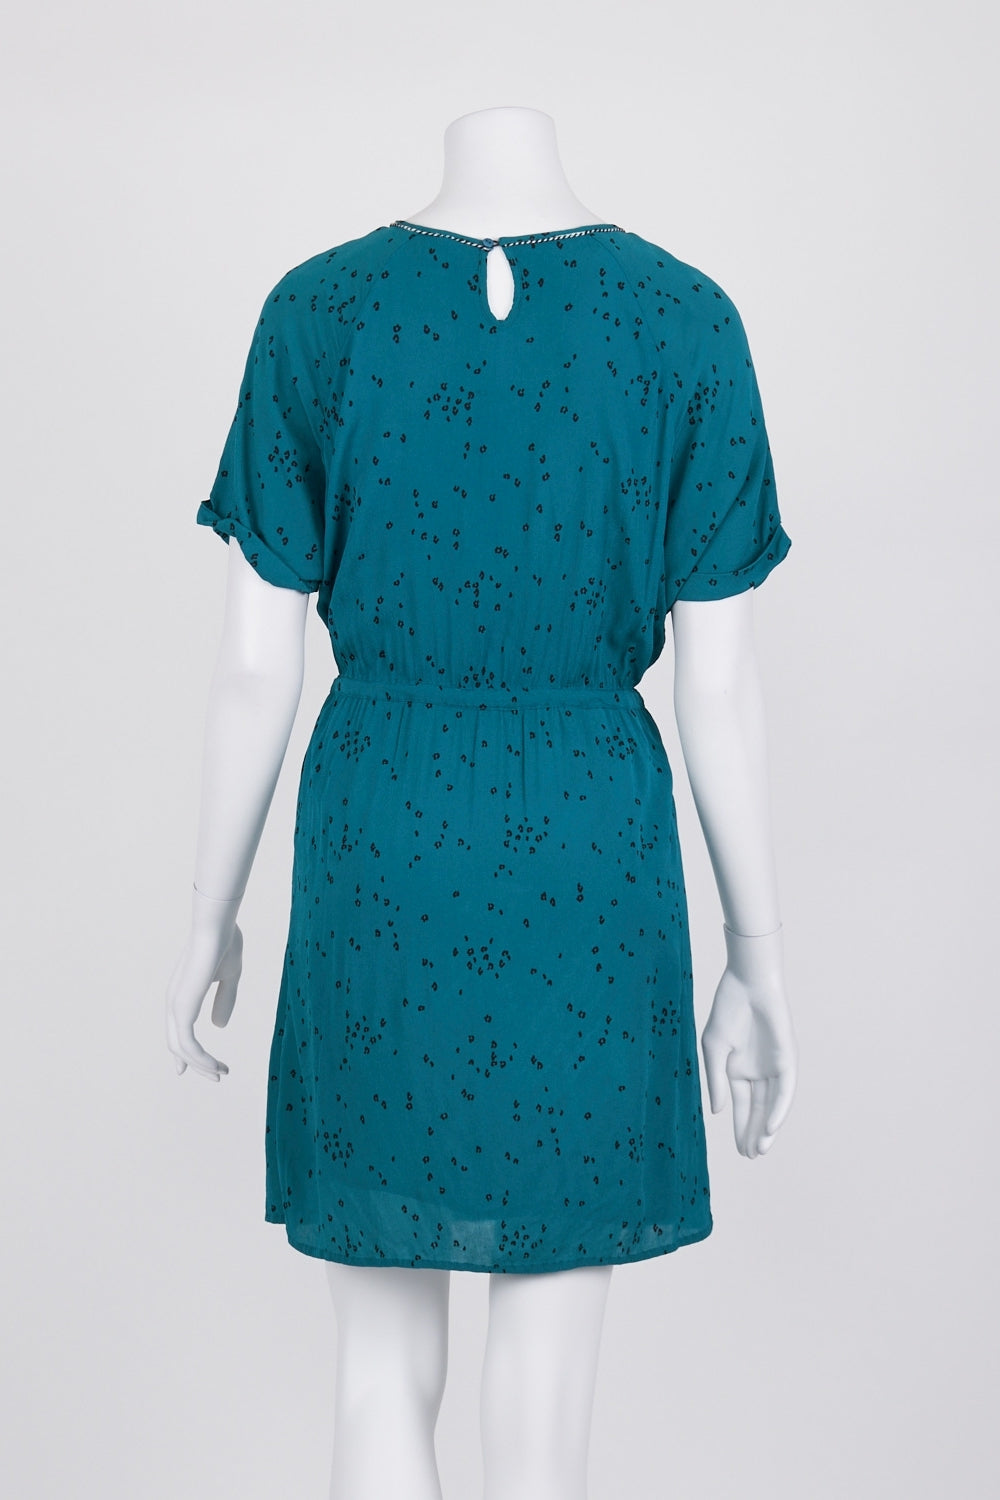 Pyrus Teal Patterned Dress S